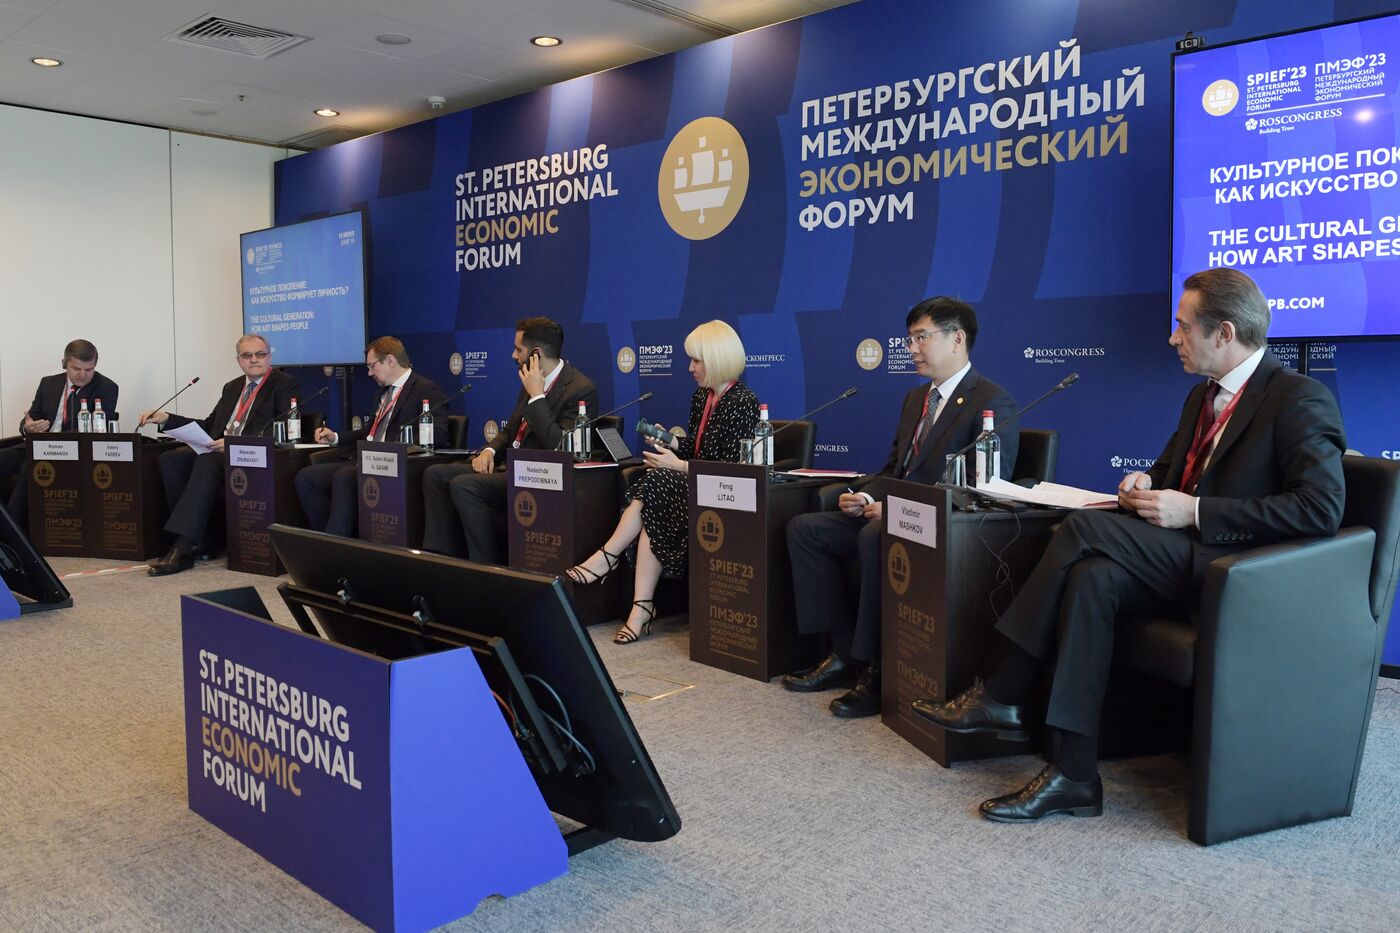 SPIEF-2023. The Cultural Generation: How Art Shapes People